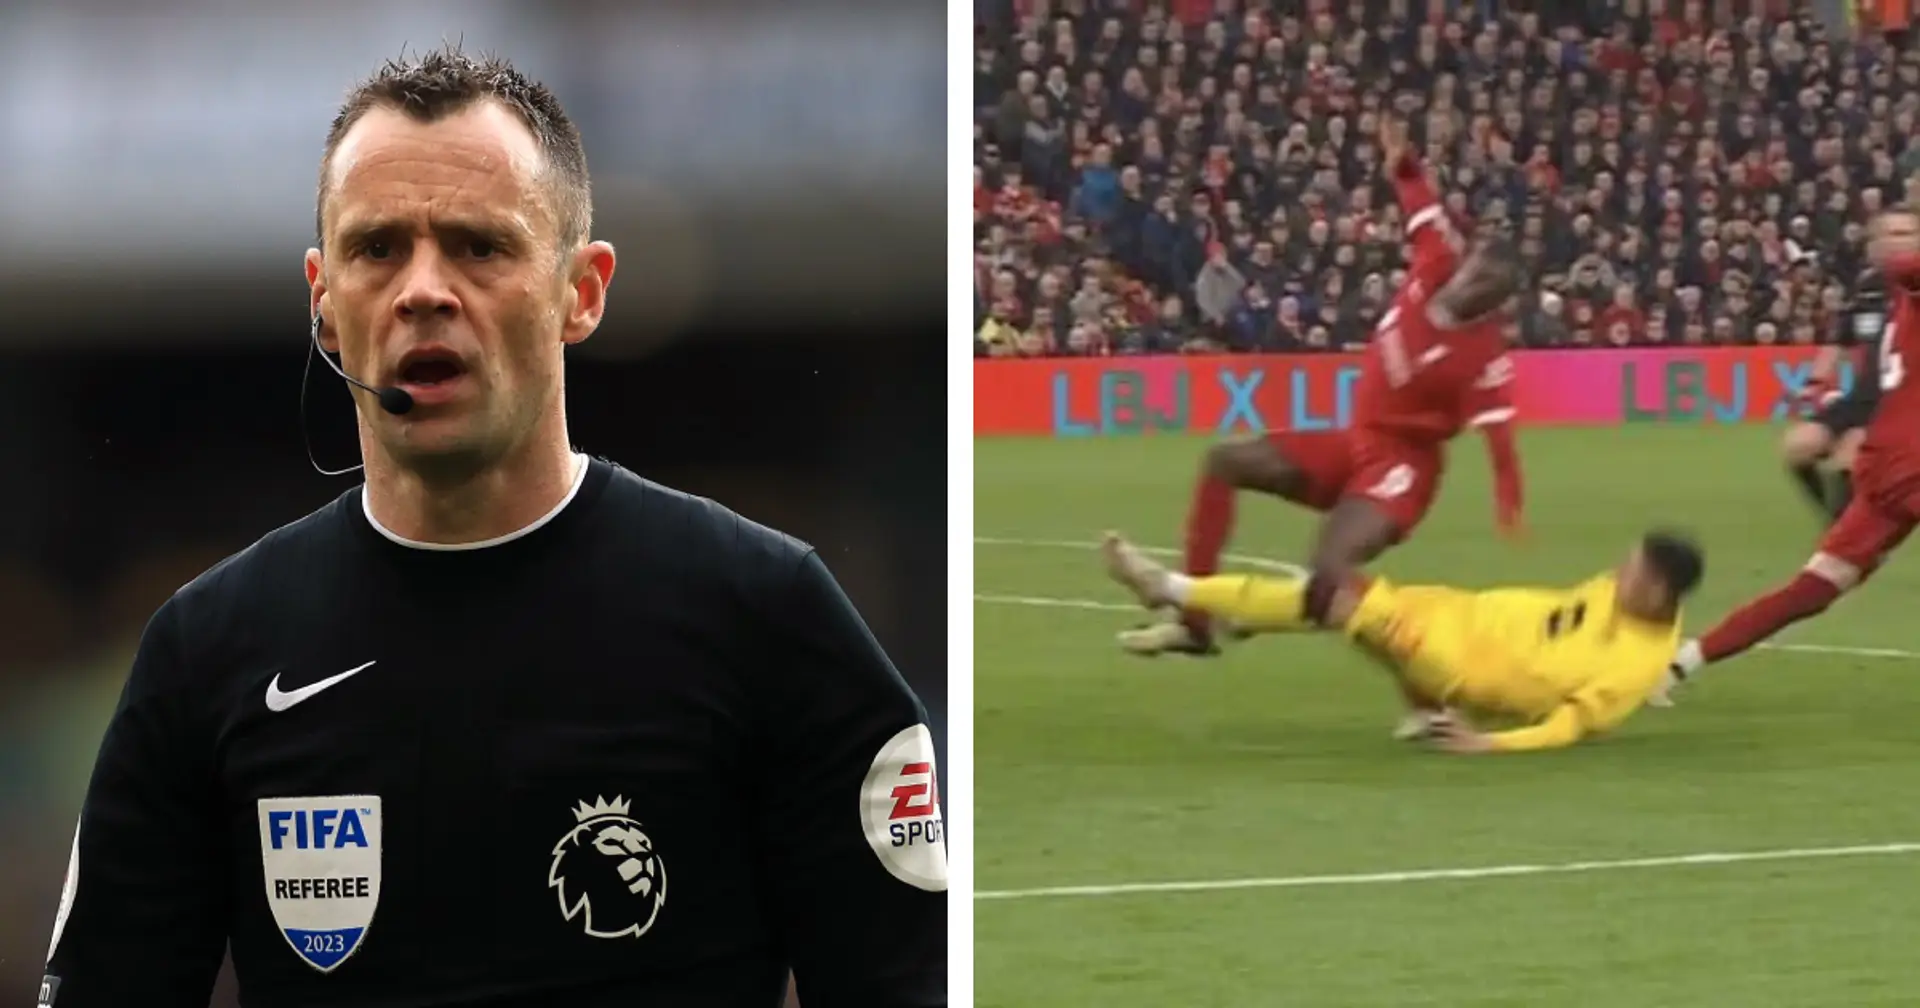 'As bad as Pickford's on Van Dijk': Liverpool fans puzzled reckless tackle on Konate went unpunished